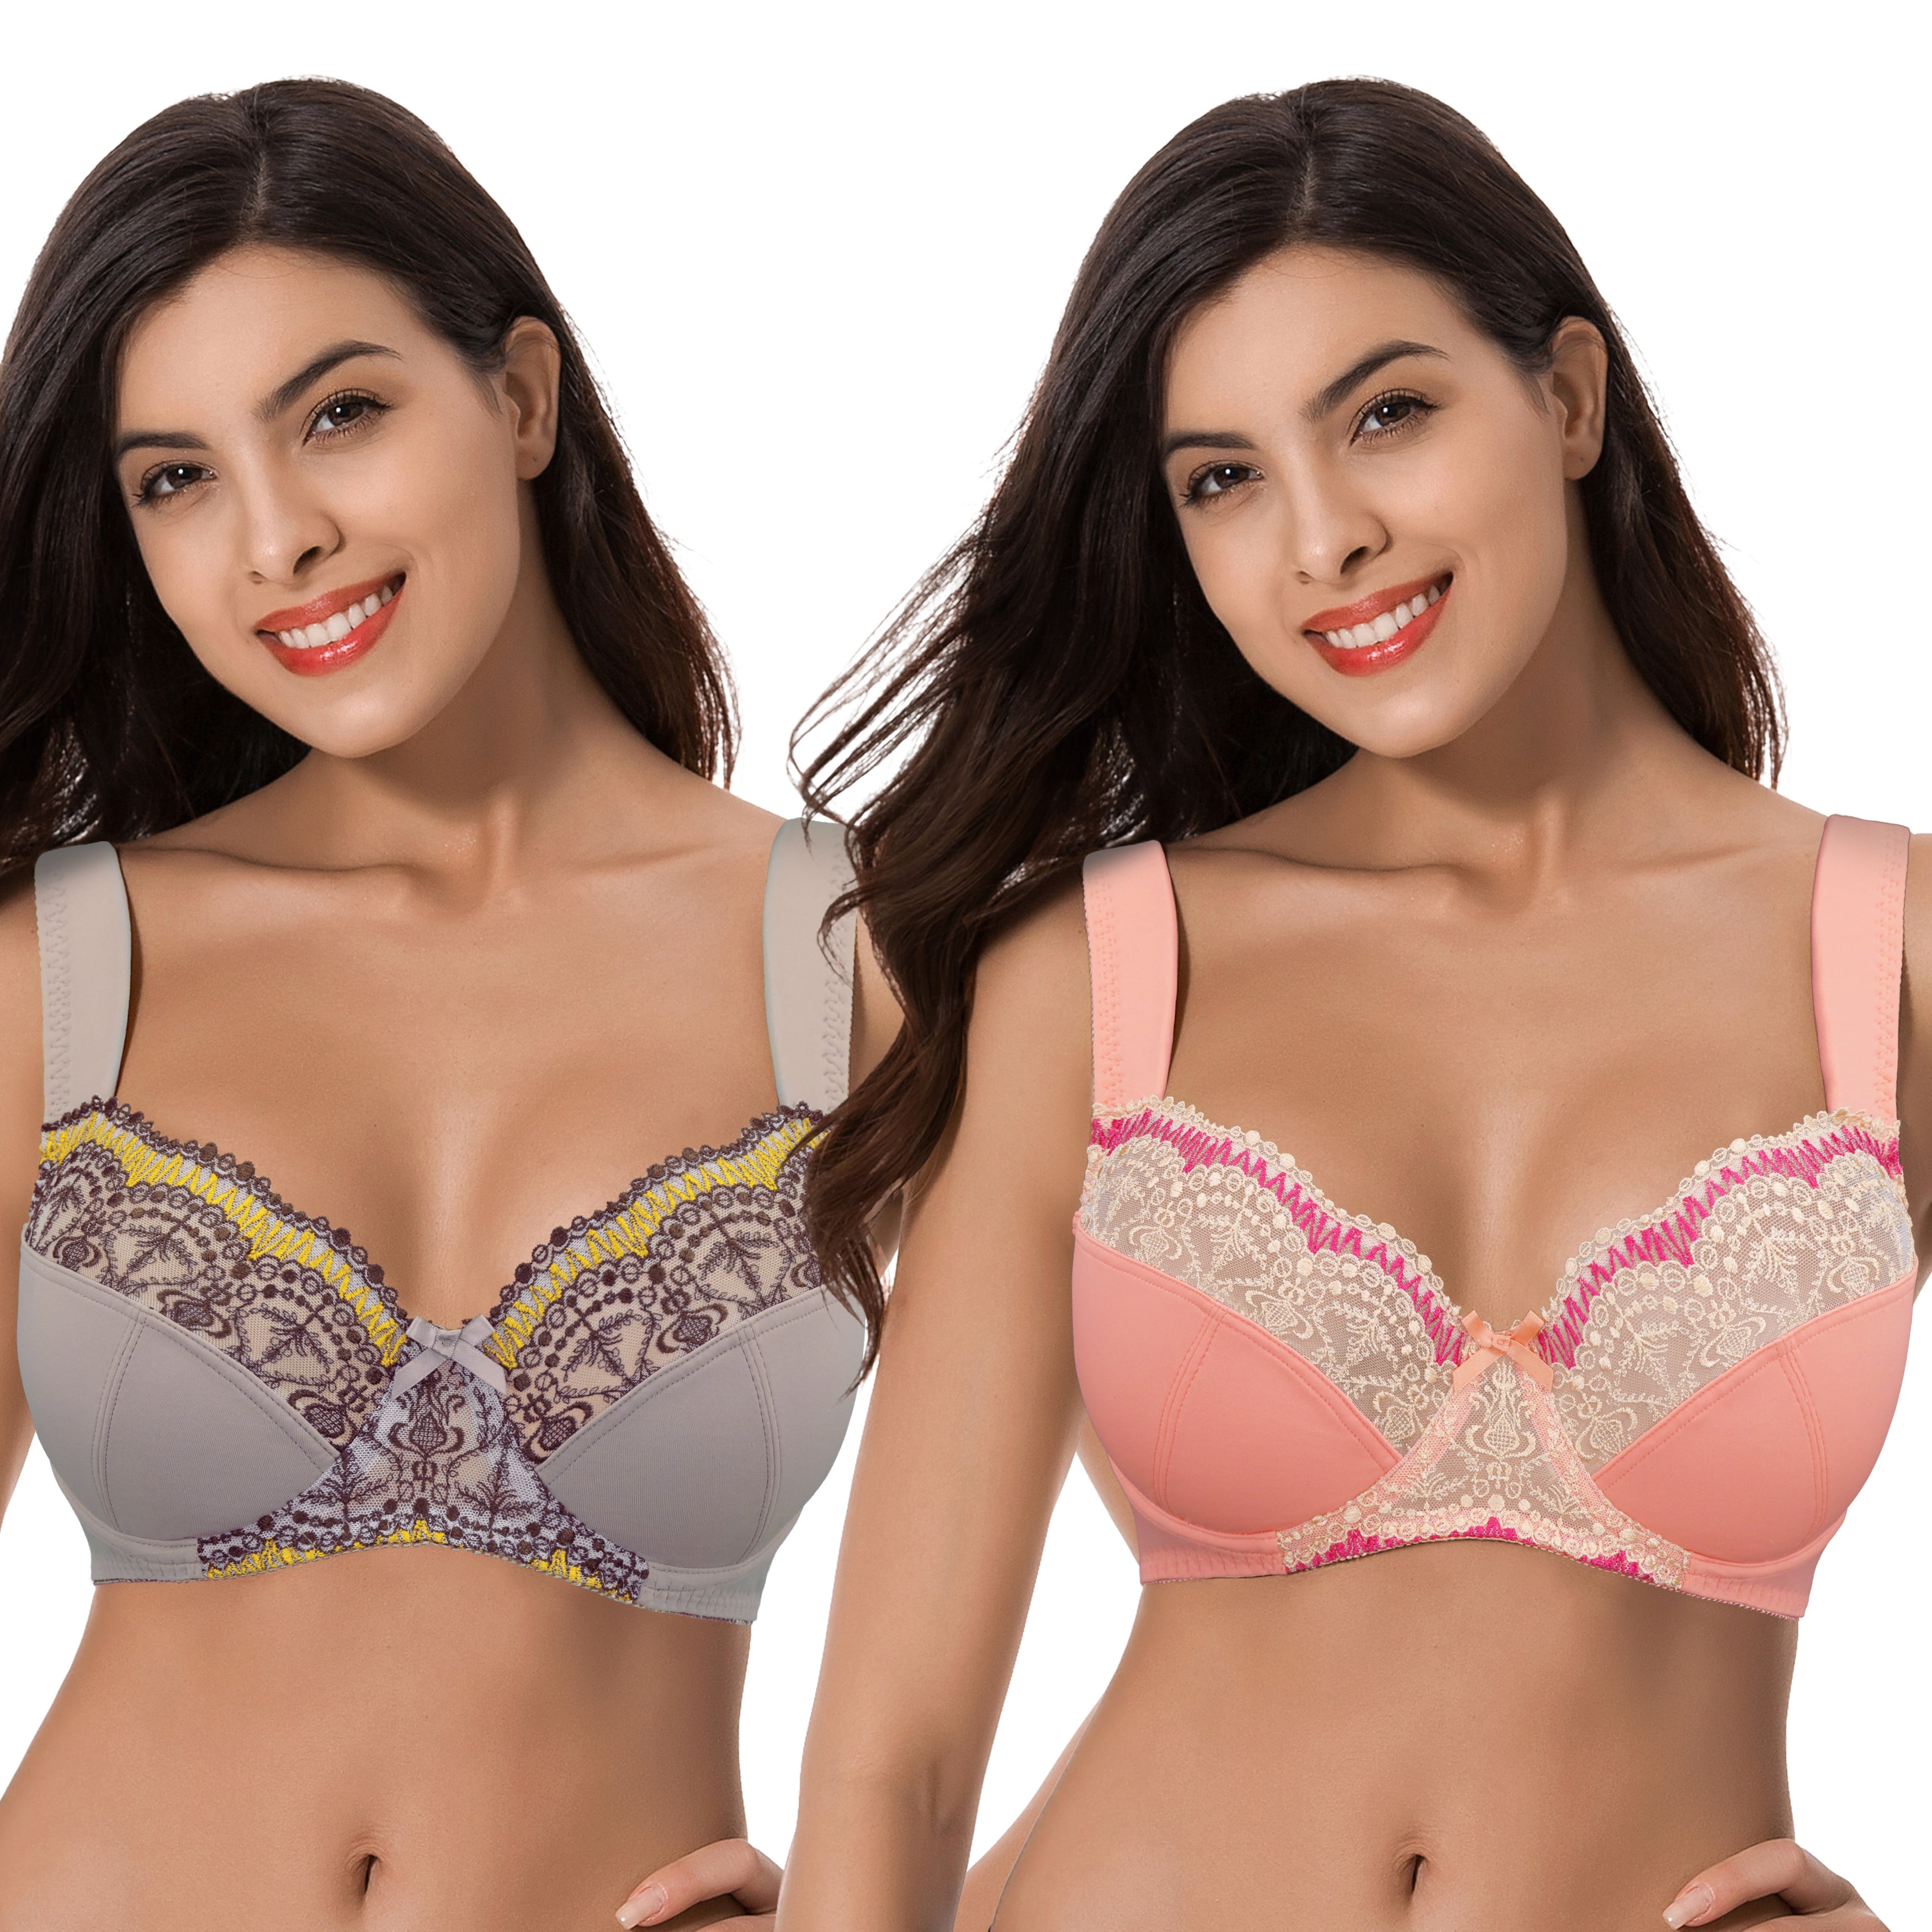 Curve Muse Plus Size Balconette Underwire Lace Bra with Padded Shoulder Straps-1 or 2pack 